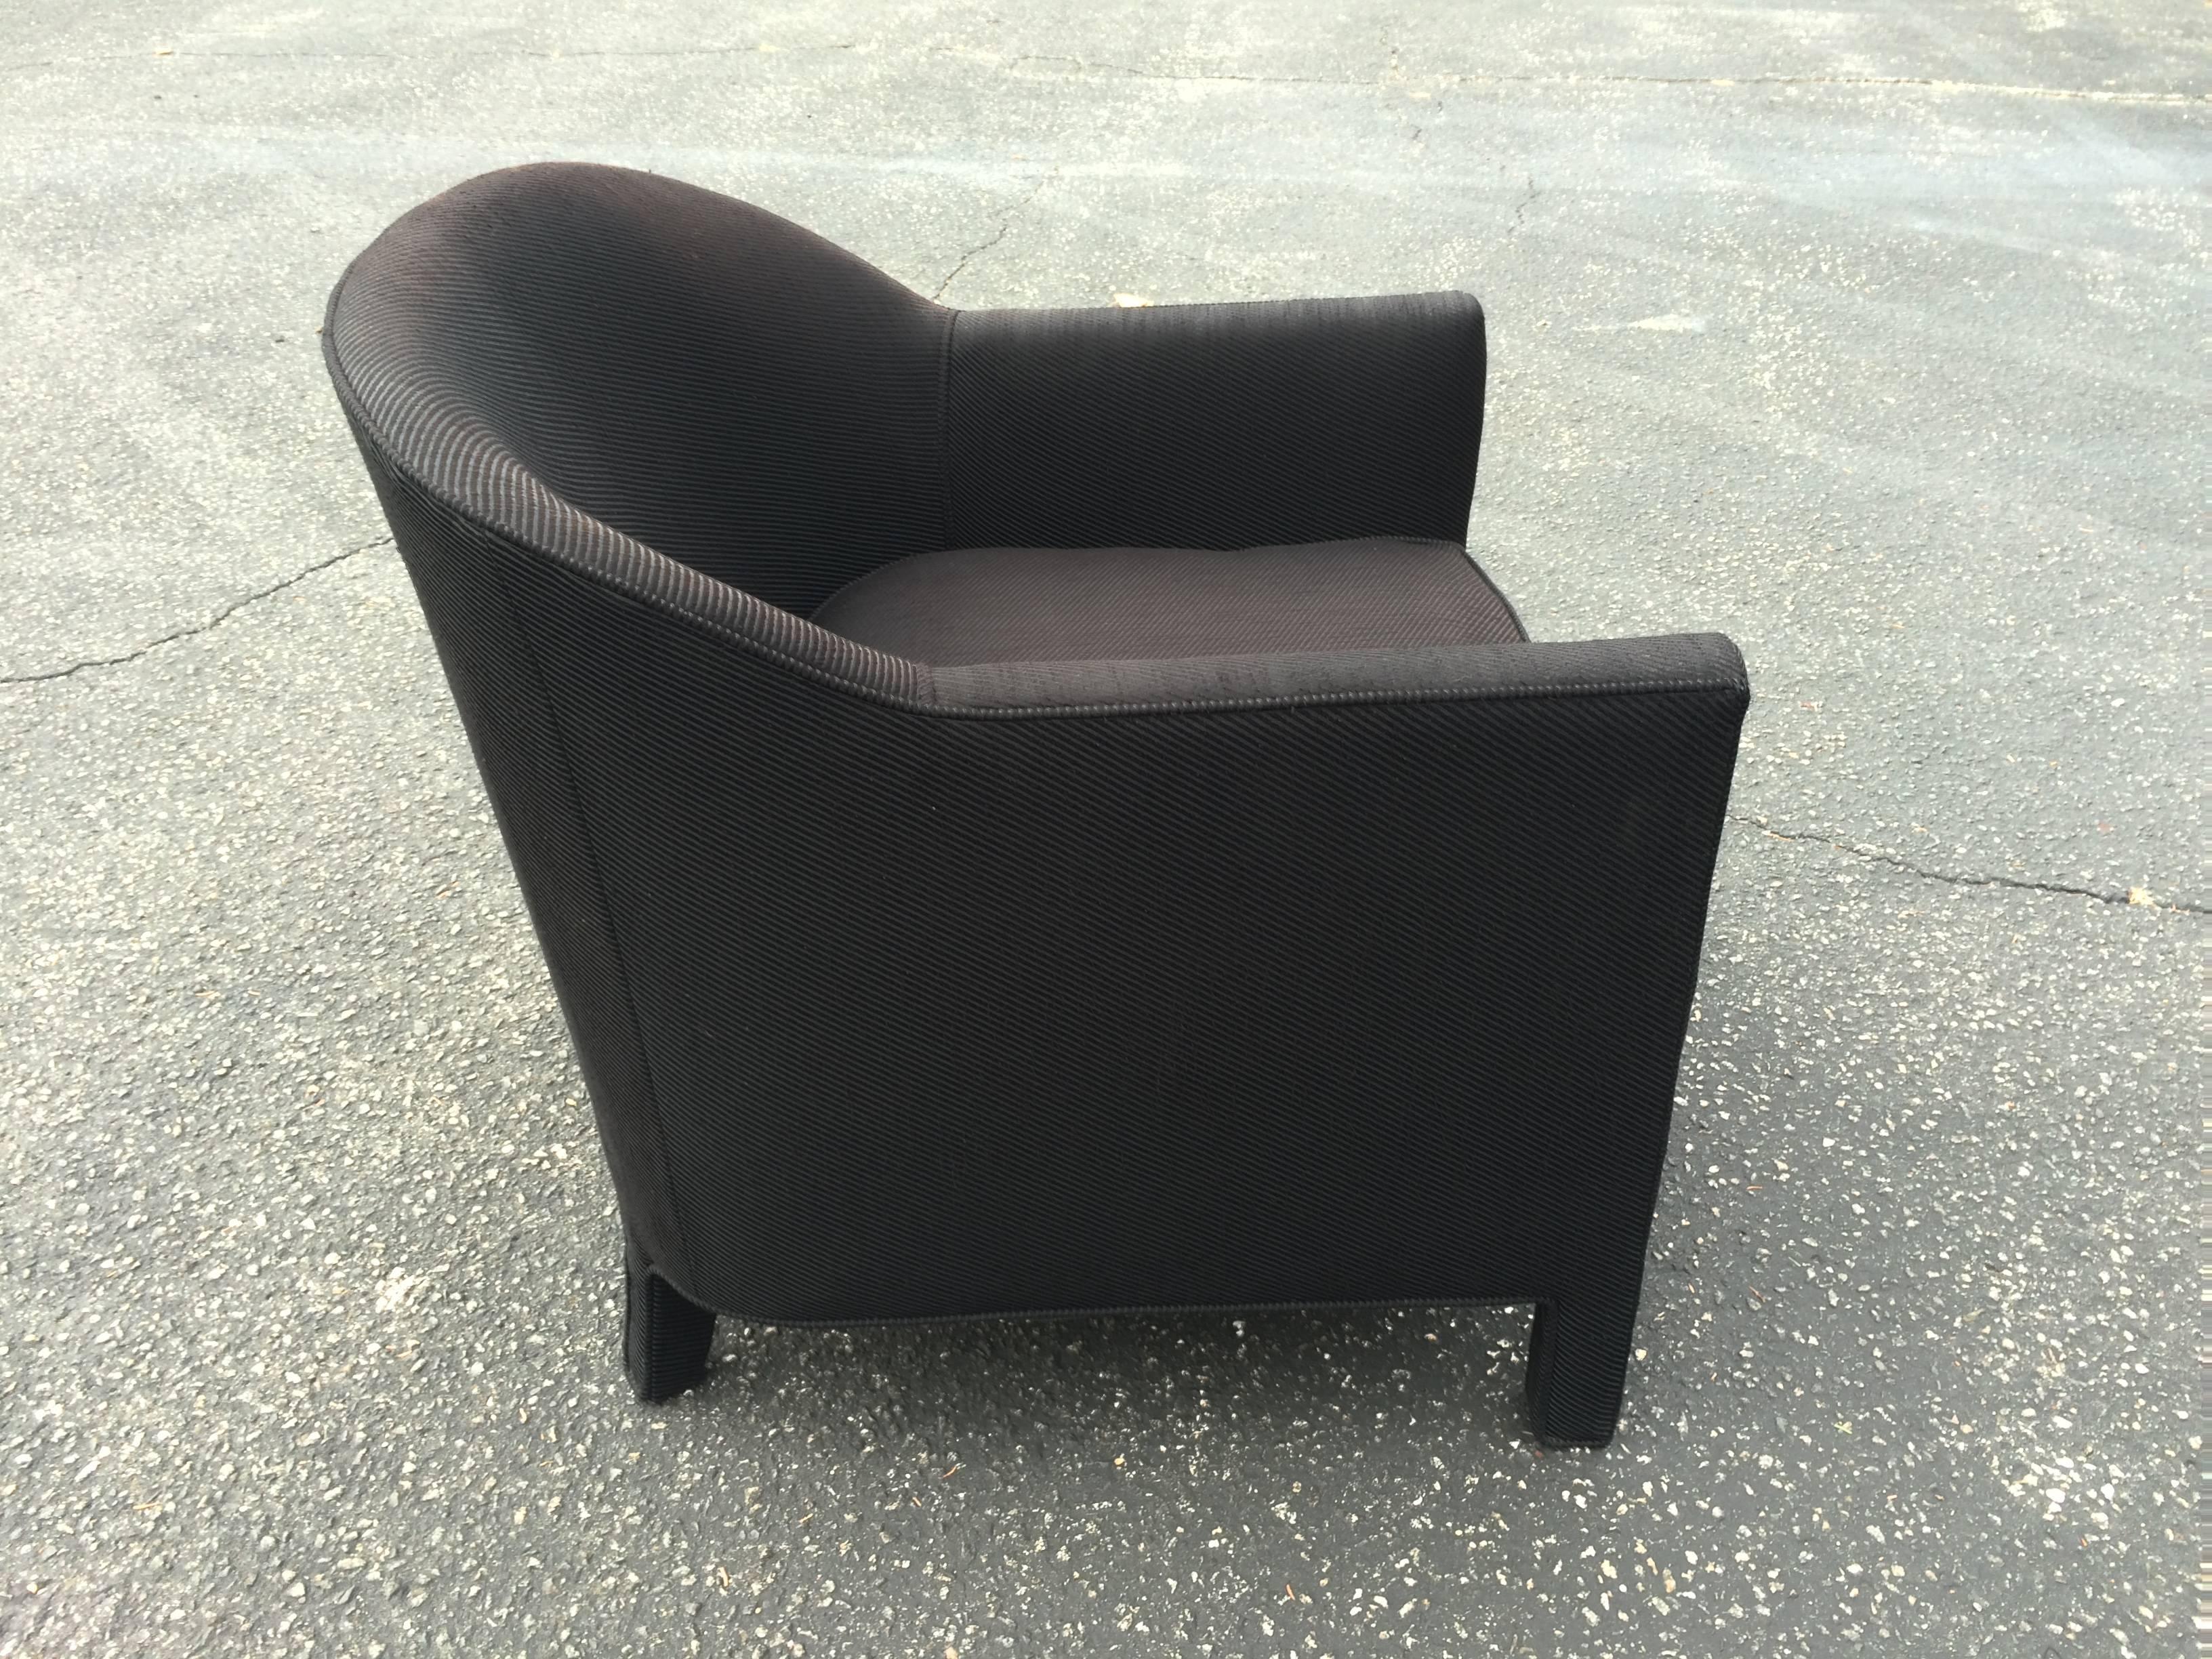 Black barrel back club chair in the style of Ward Bennett. High end construction. Down filled seat cushion. Fading to one side of chair from sun hence could use a re-upholstery . Great solid bones and shape. Comes with one tufted loose pillow.